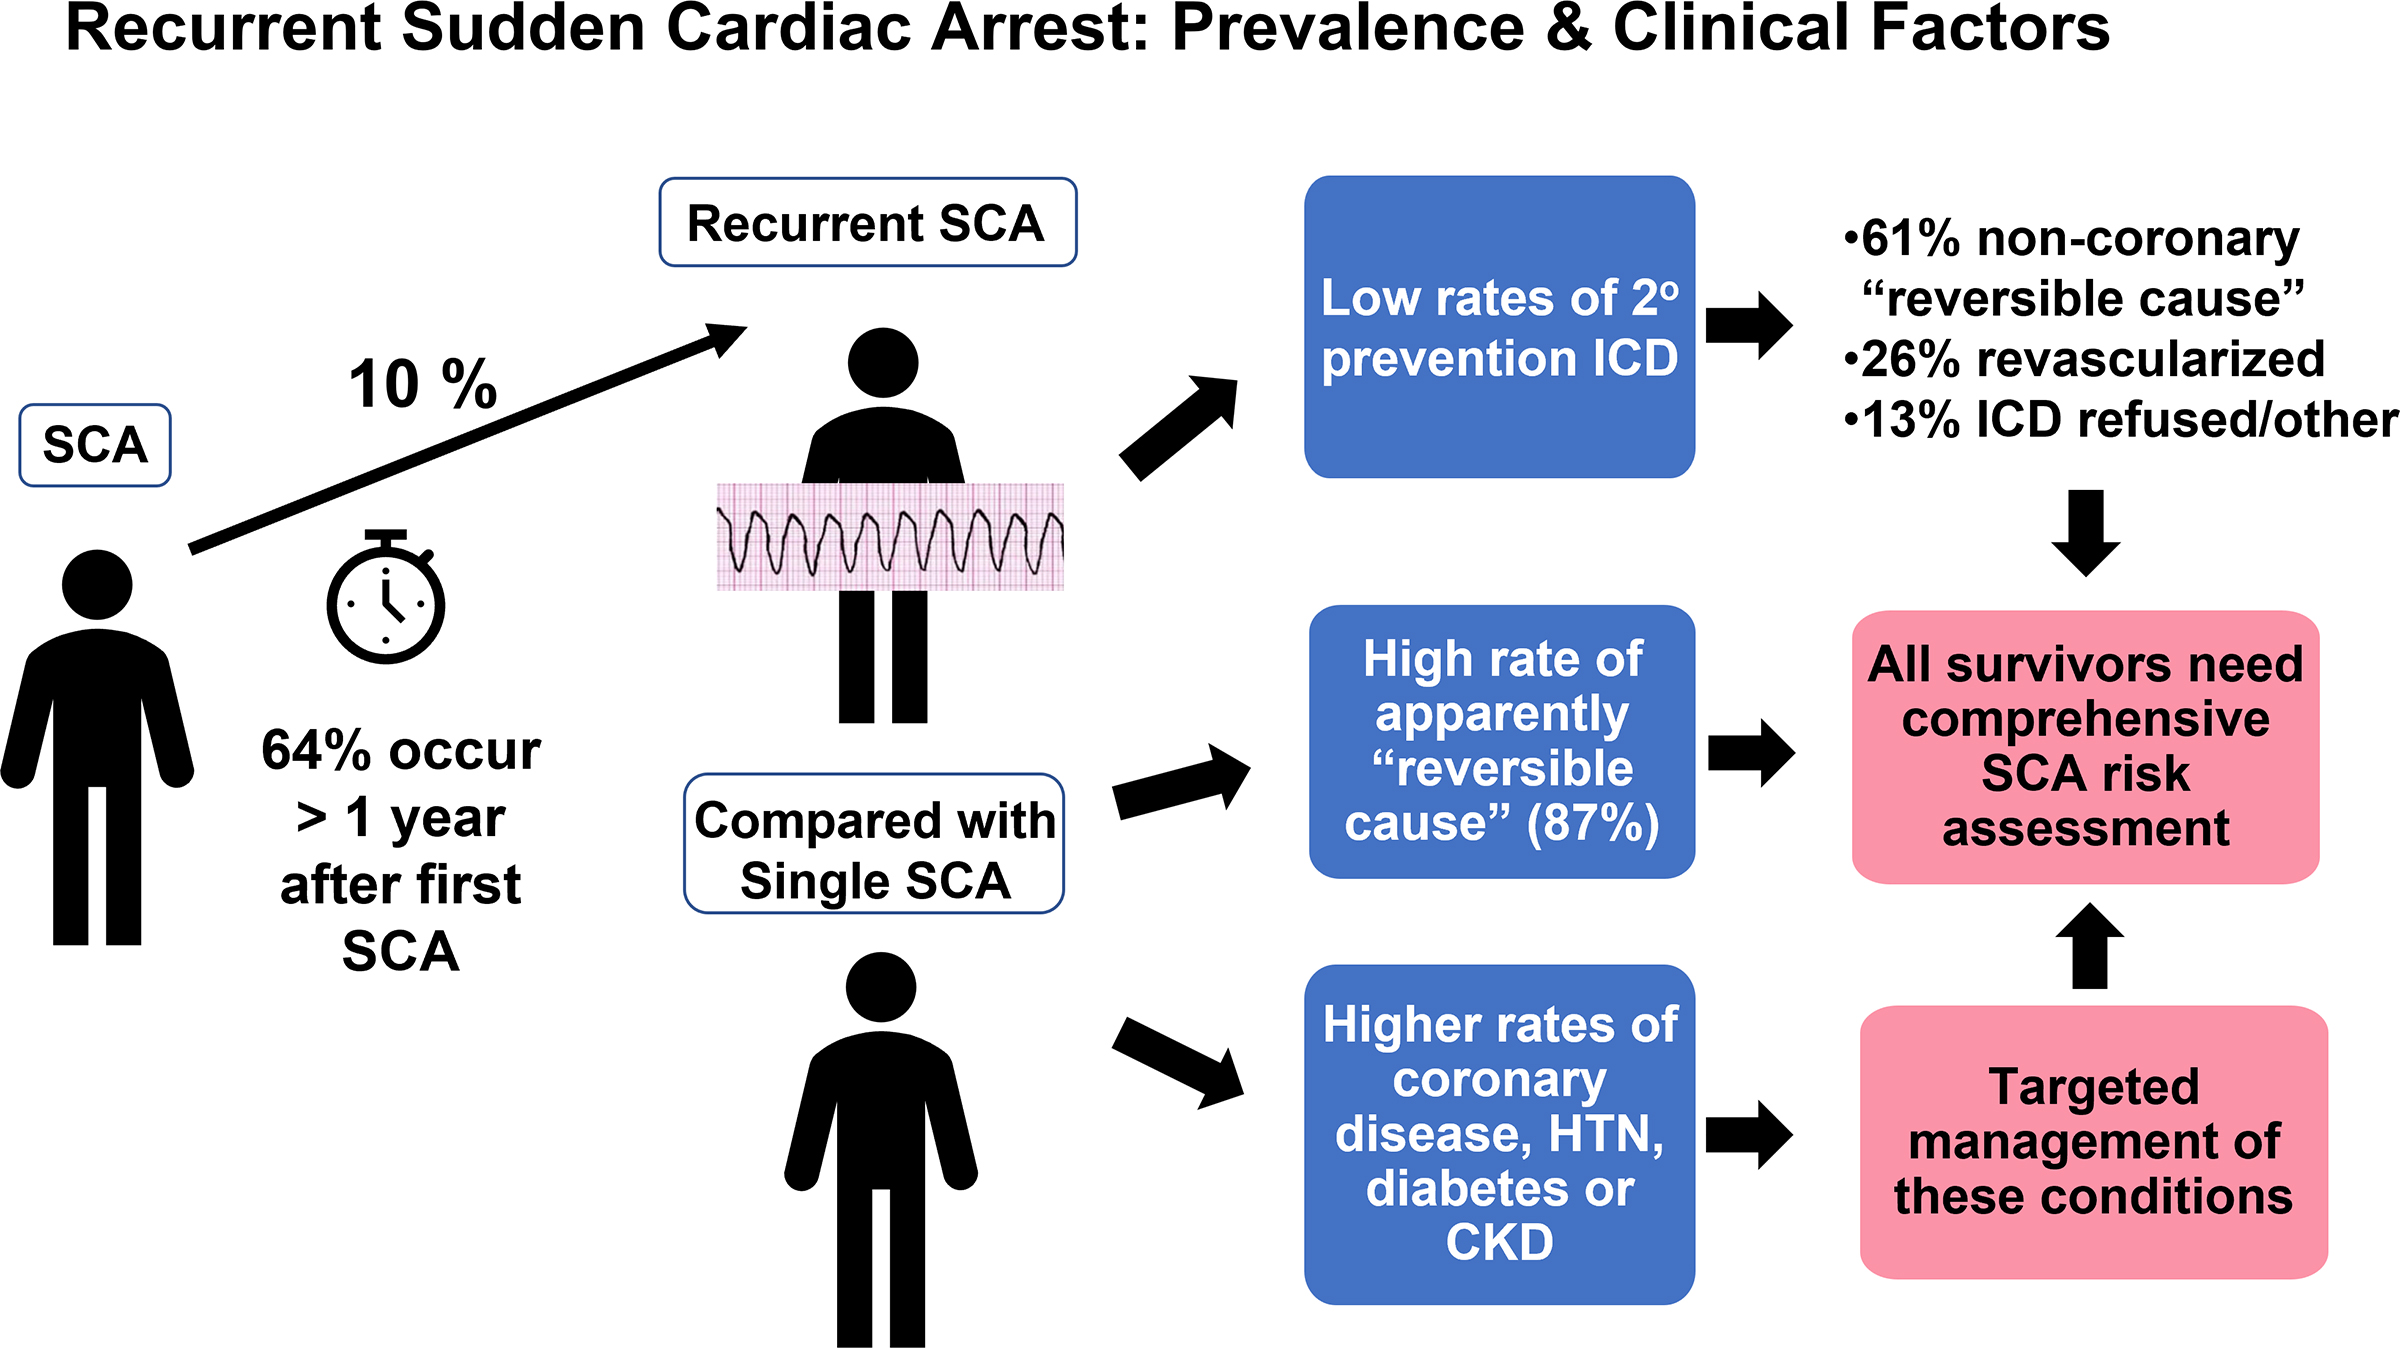 Recurrent Out-of-Hospital Sudden Cardiac Arrest: Prevalence and Clinical Factors